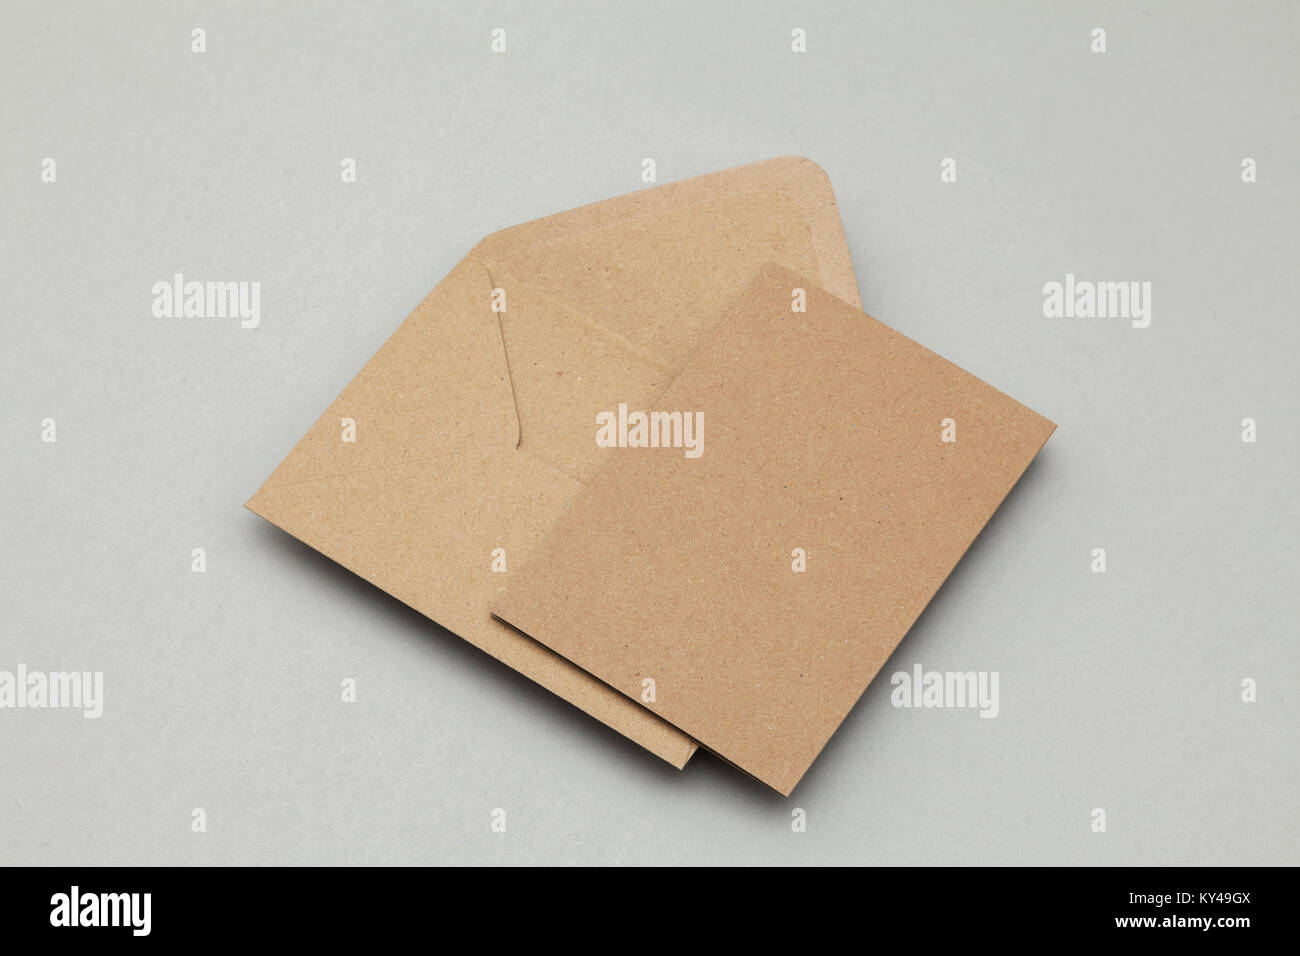 Blank brown kraft paper card and envelope on a grey background Stock Photo